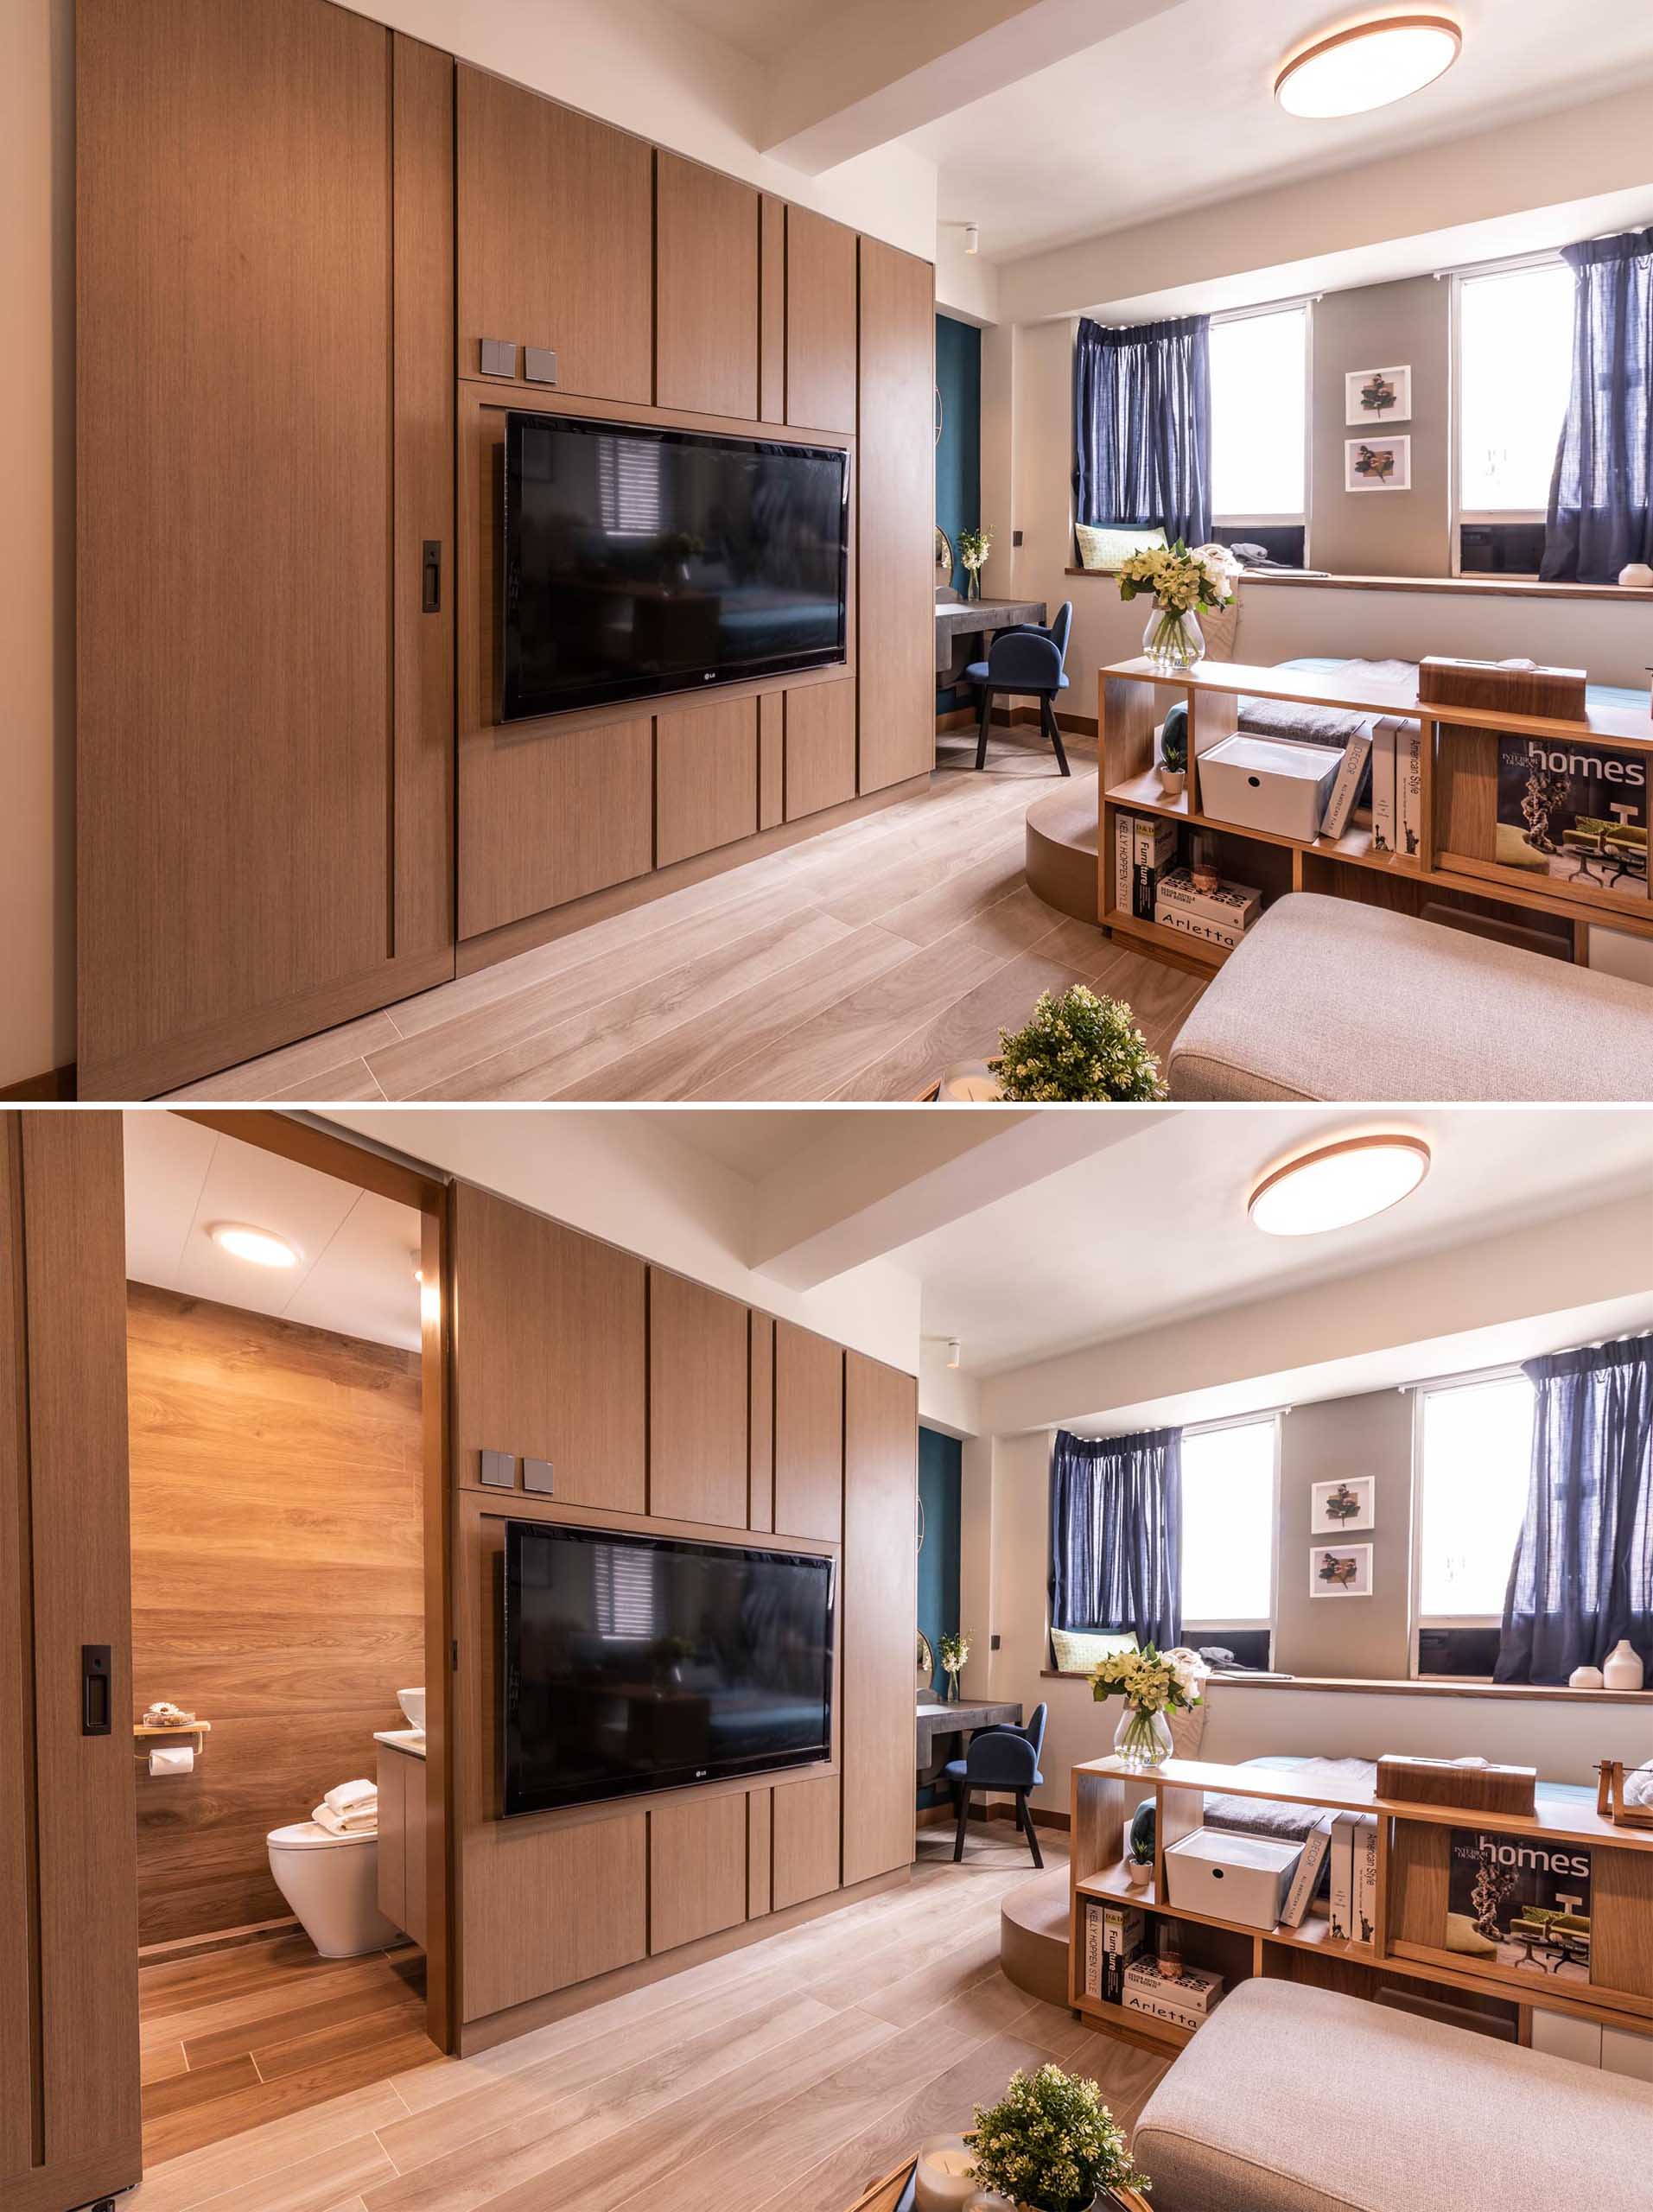 A small and modern apartment with a platform bed, a tiny kitchen, and a wood feature wall that hides a wardrobe, bathroom door, and structural column.